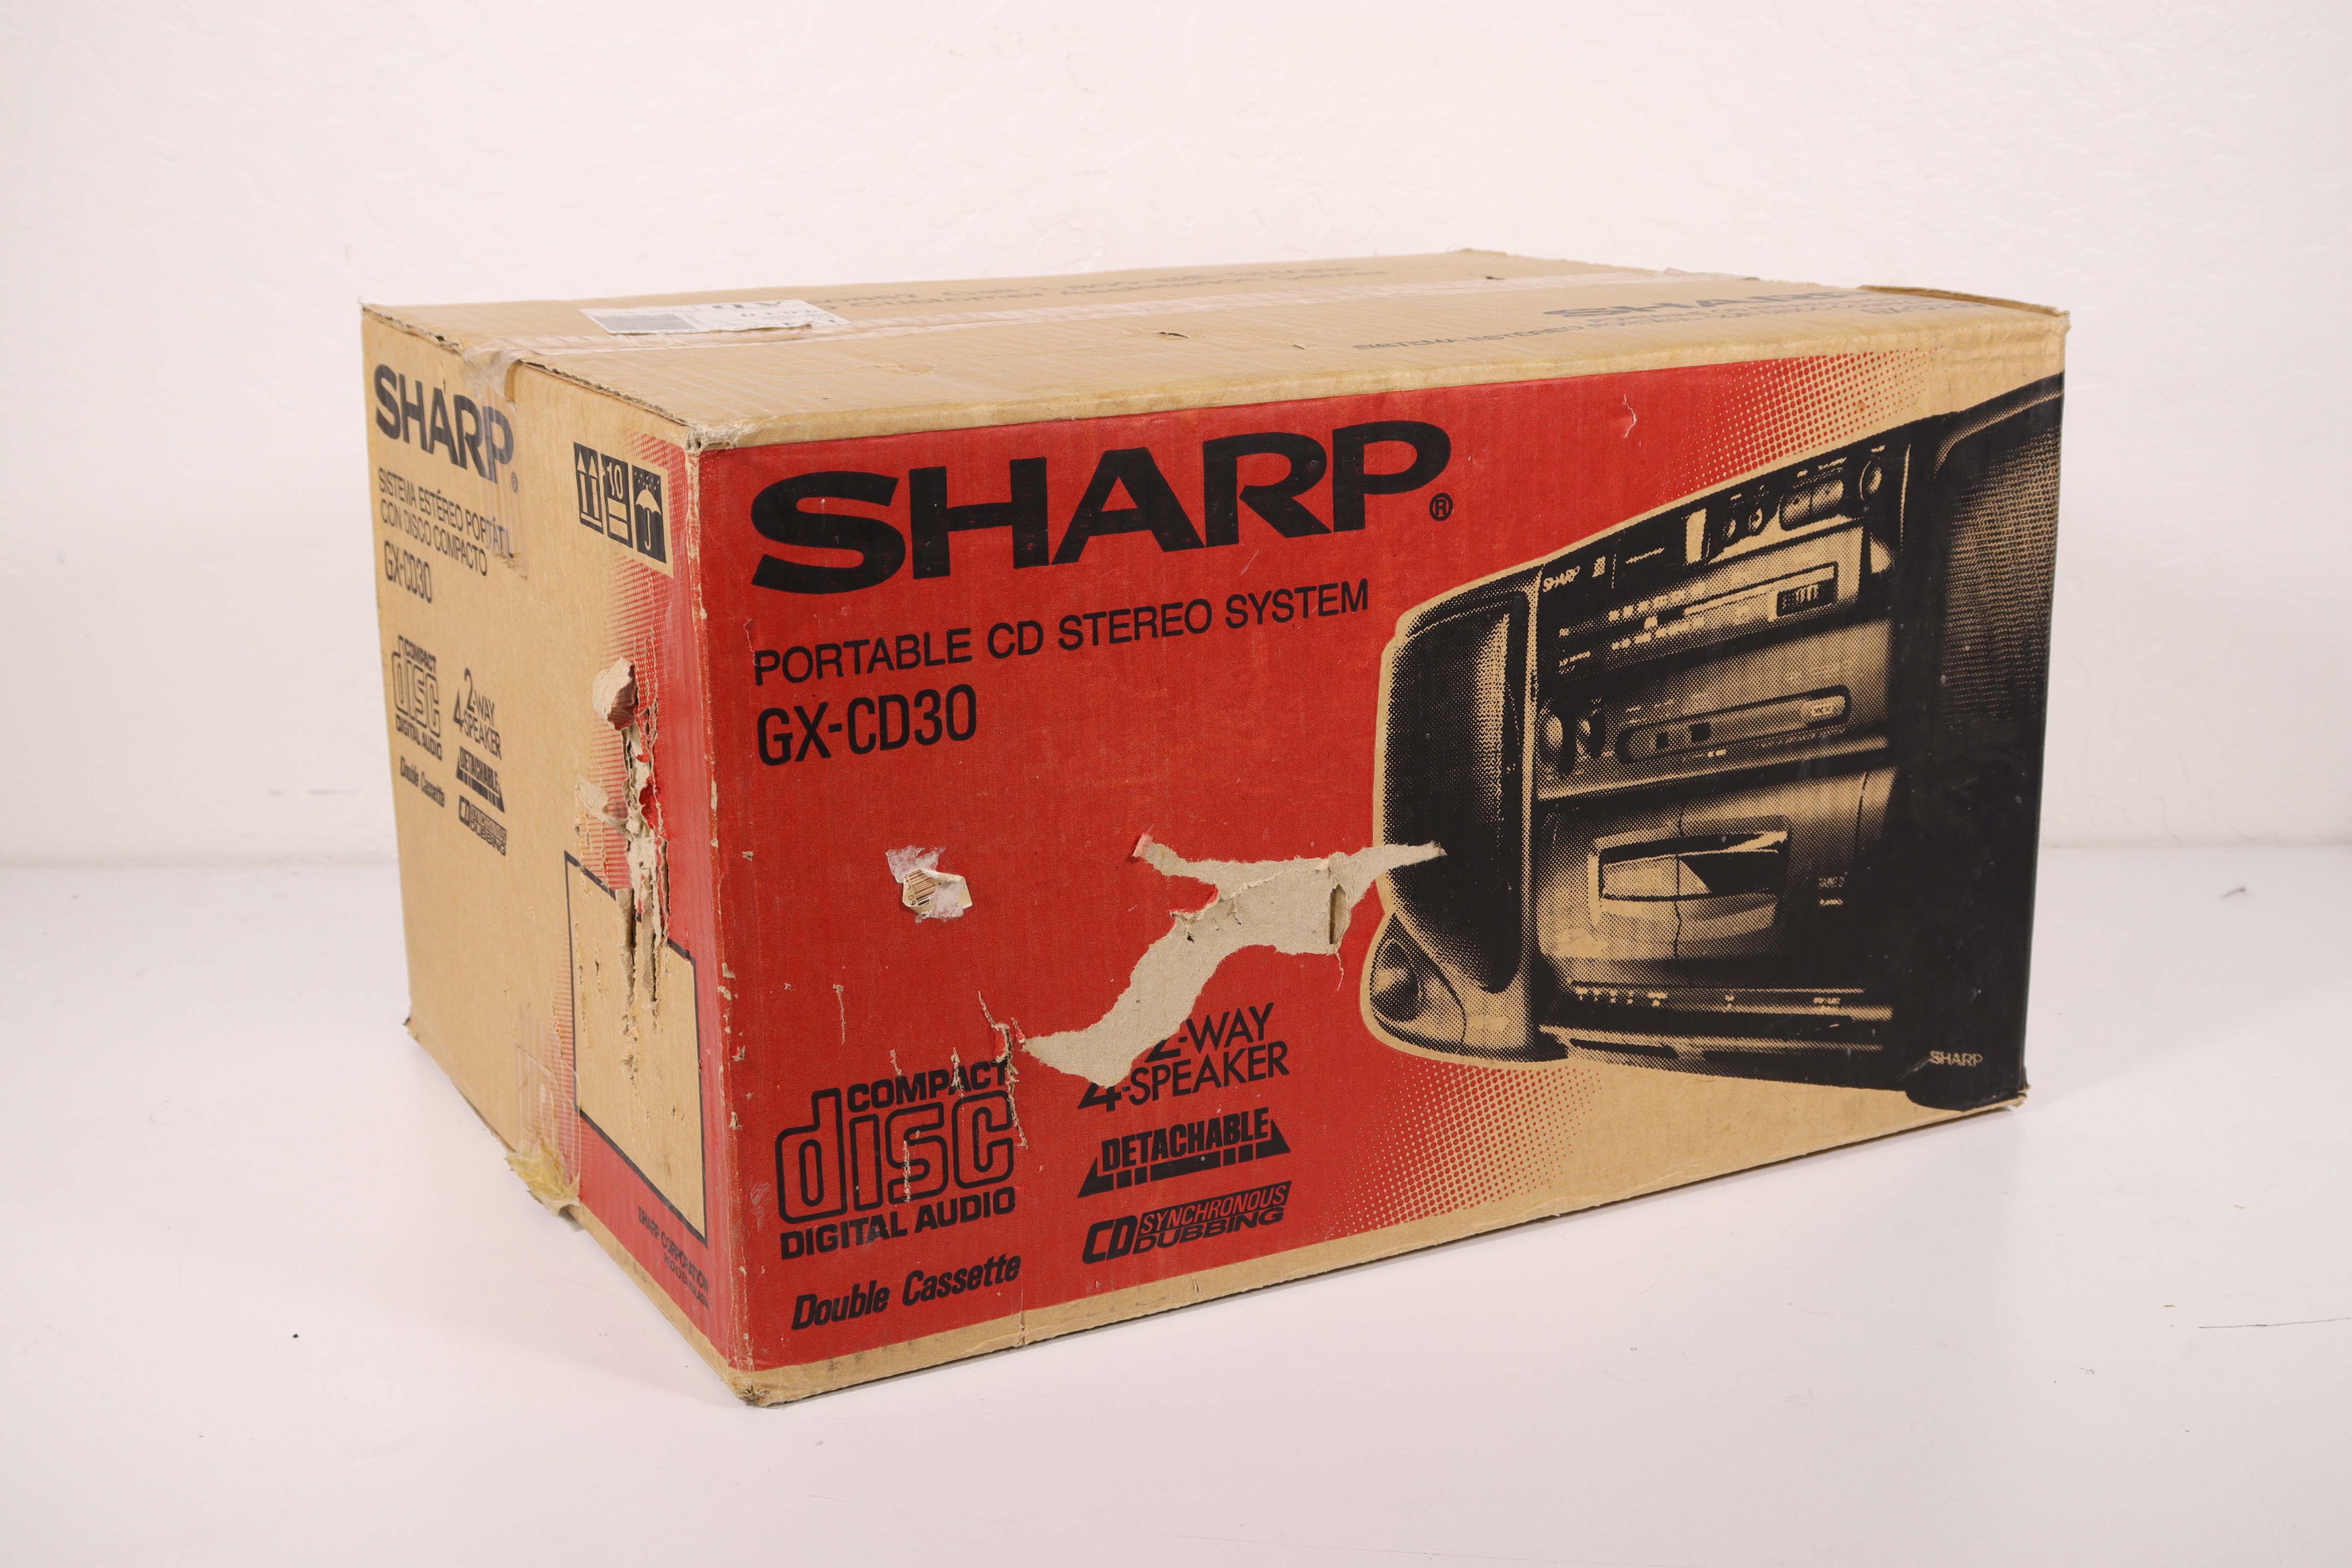 Portable radio cassette player made by the Sharp Corporation, radio cassette  